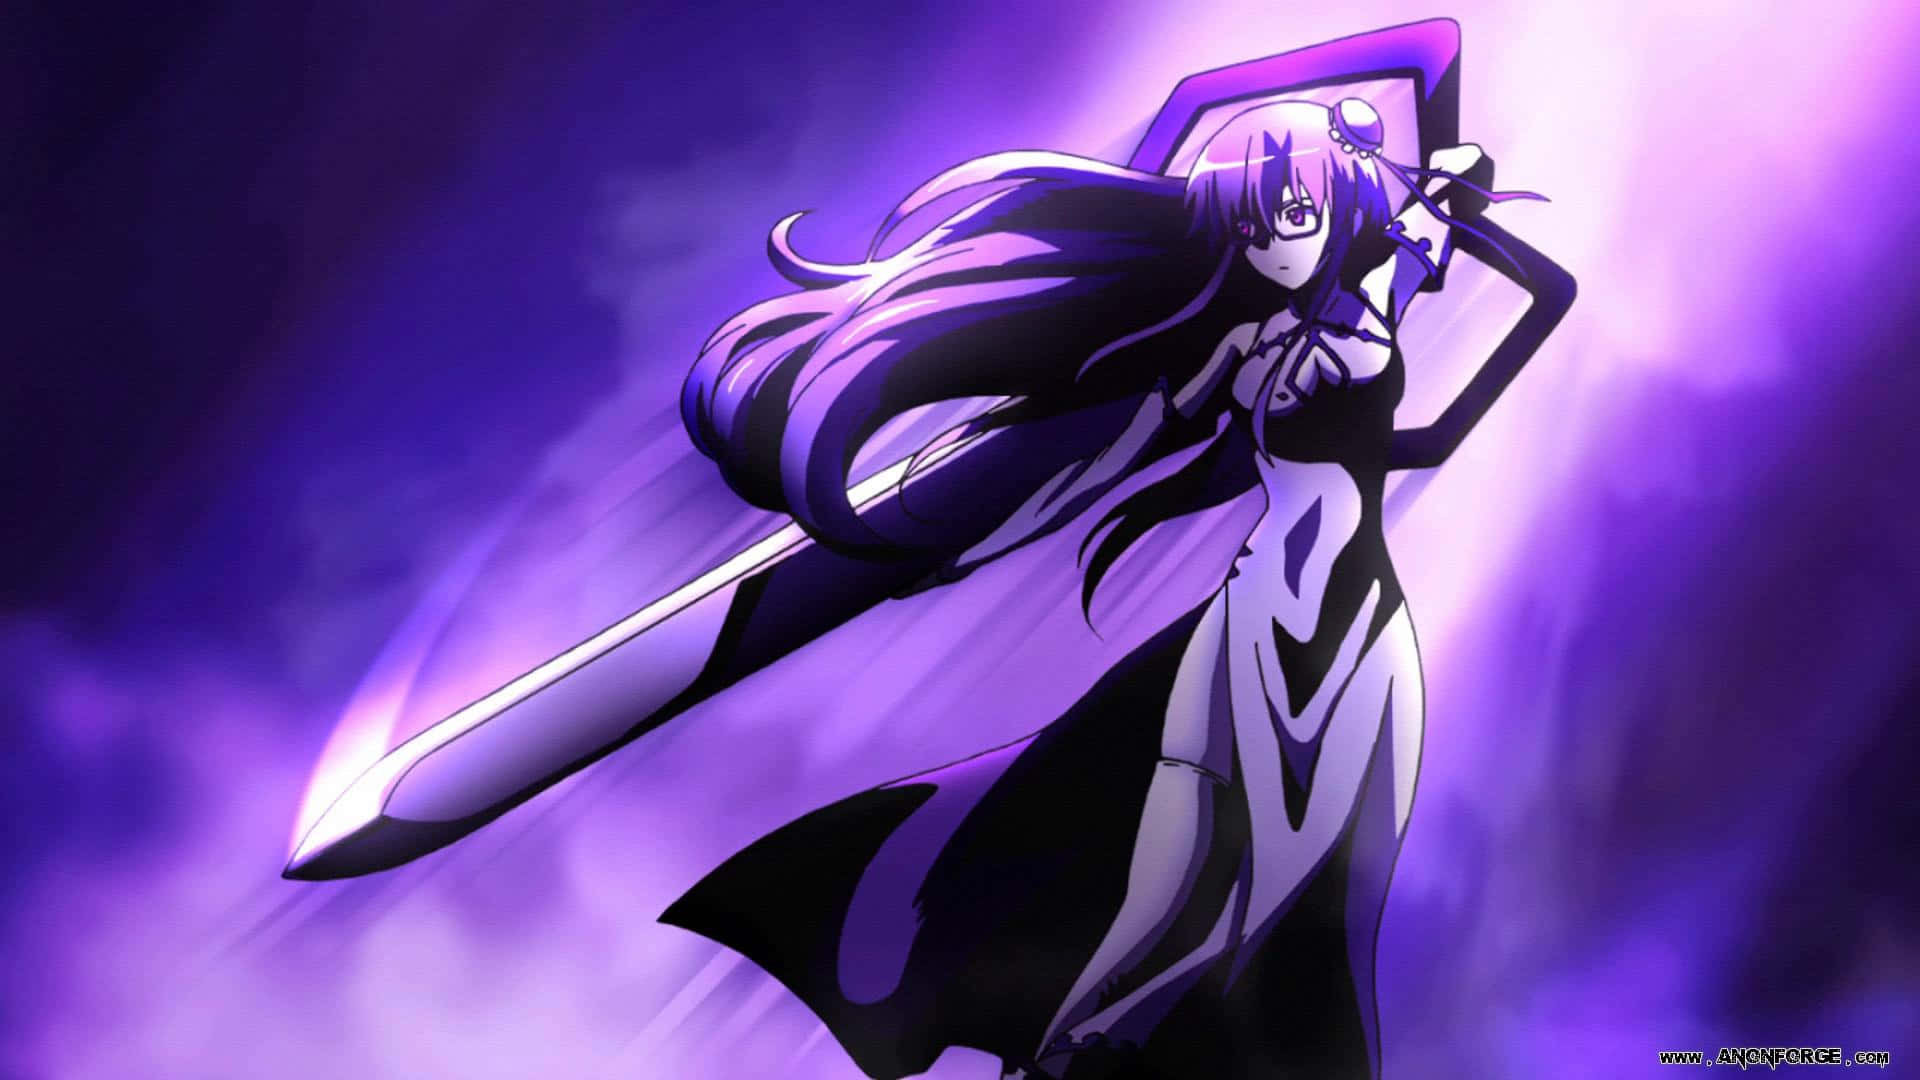 Akame Fights for Justice in "Akame Ga Kill"